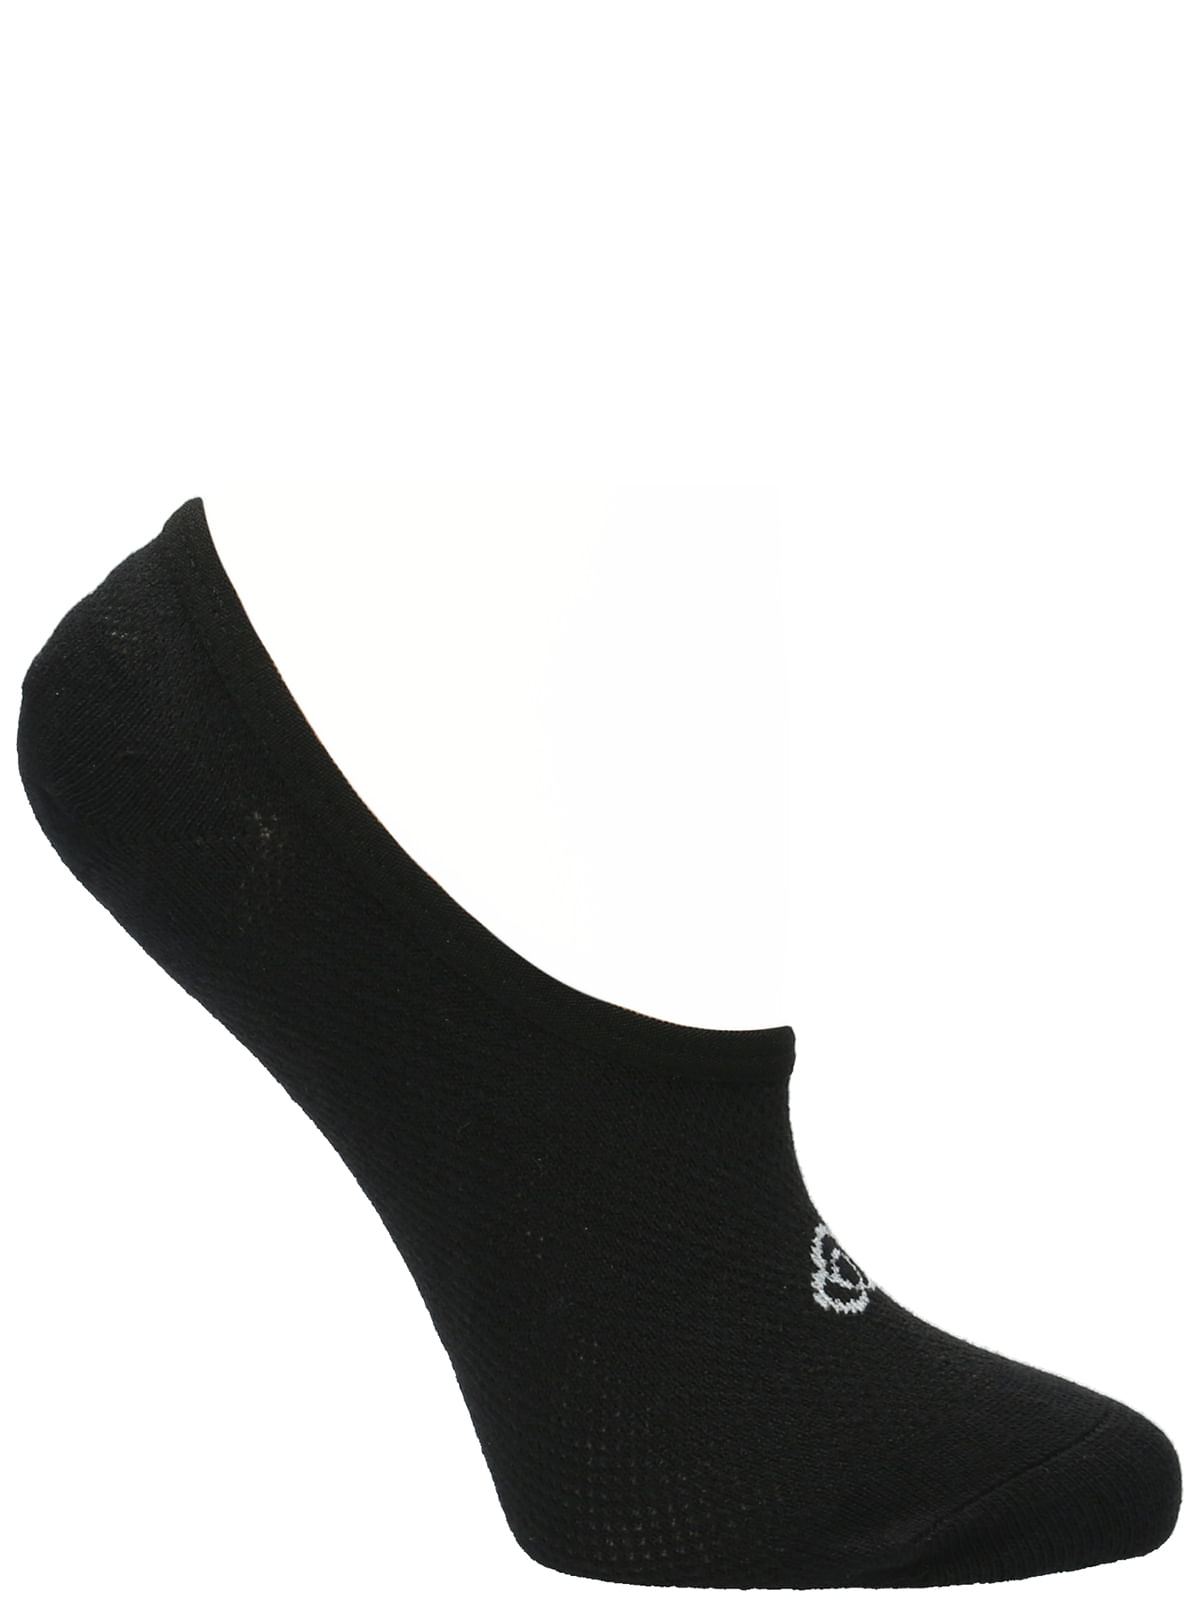 Calcetines Mujer 3 Pack No Show  Negro